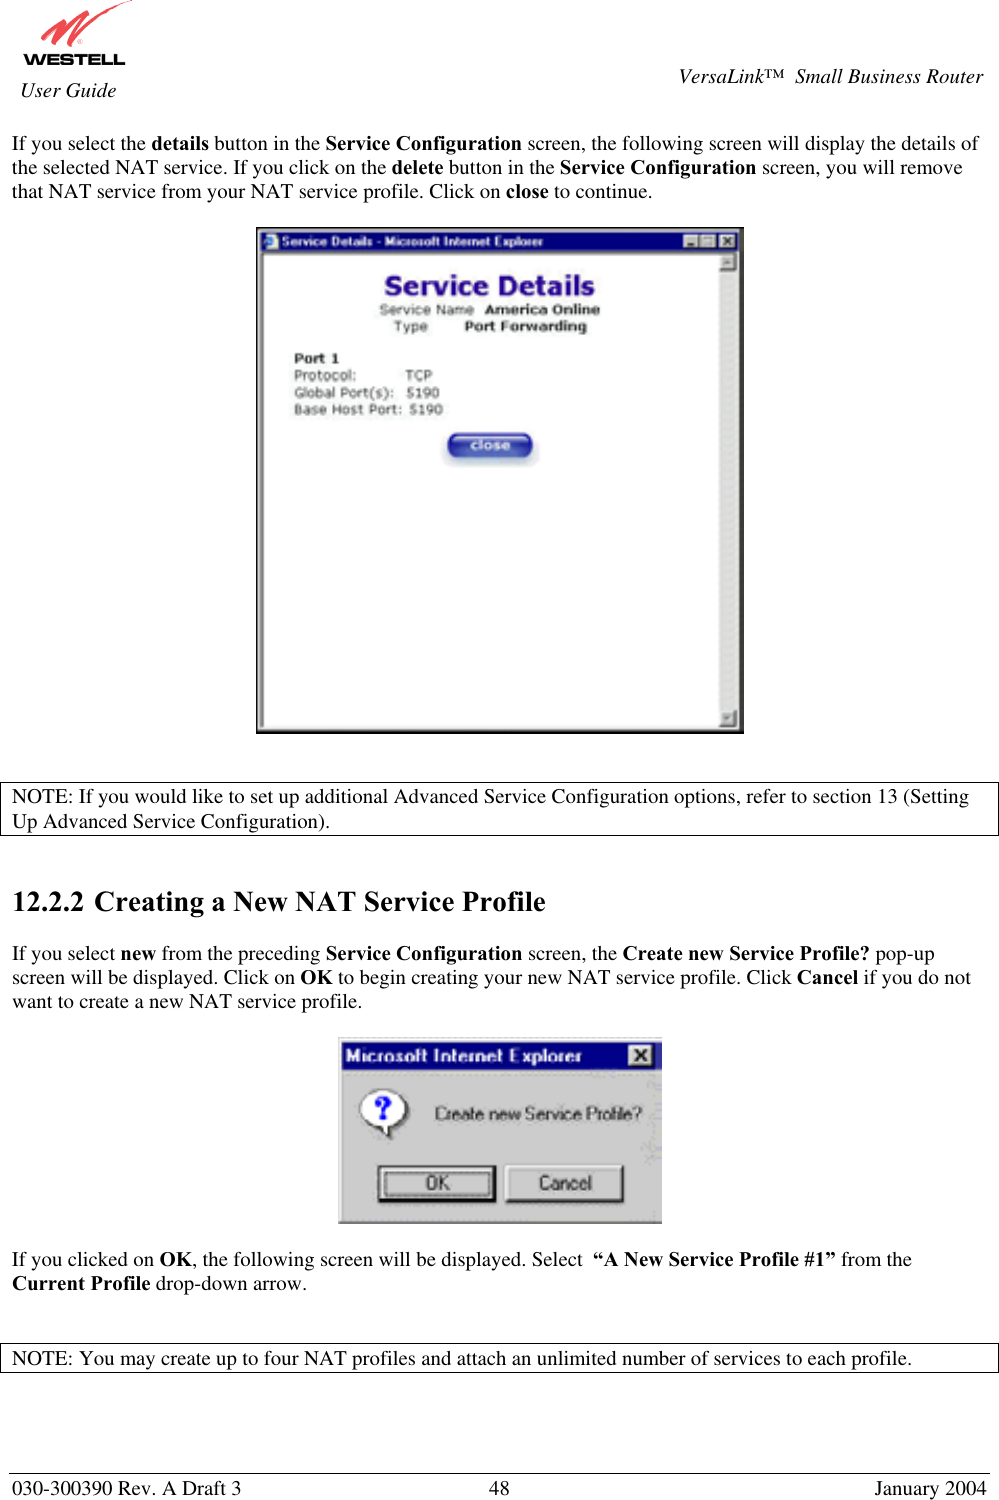       030-300390 Rev. A Draft 3  48  January 2004  VersaLink™  Small Business Router  User Guide If you select the details button in the Service Configuration screen, the following screen will display the details of the selected NAT service. If you click on the delete button in the Service Configuration screen, you will remove that NAT service from your NAT service profile. Click on close to continue.     NOTE: If you would like to set up additional Advanced Service Configuration options, refer to section 13 (Setting Up Advanced Service Configuration).   12.2.2  Creating a New NAT Service Profile  If you select new from the preceding Service Configuration screen, the Create new Service Profile? pop-up screen will be displayed. Click on OK to begin creating your new NAT service profile. Click Cancel if you do not want to create a new NAT service profile.    If you clicked on OK, the following screen will be displayed. Select  “A New Service Profile #1” from the Current Profile drop-down arrow.    NOTE: You may create up to four NAT profiles and attach an unlimited number of services to each profile.   